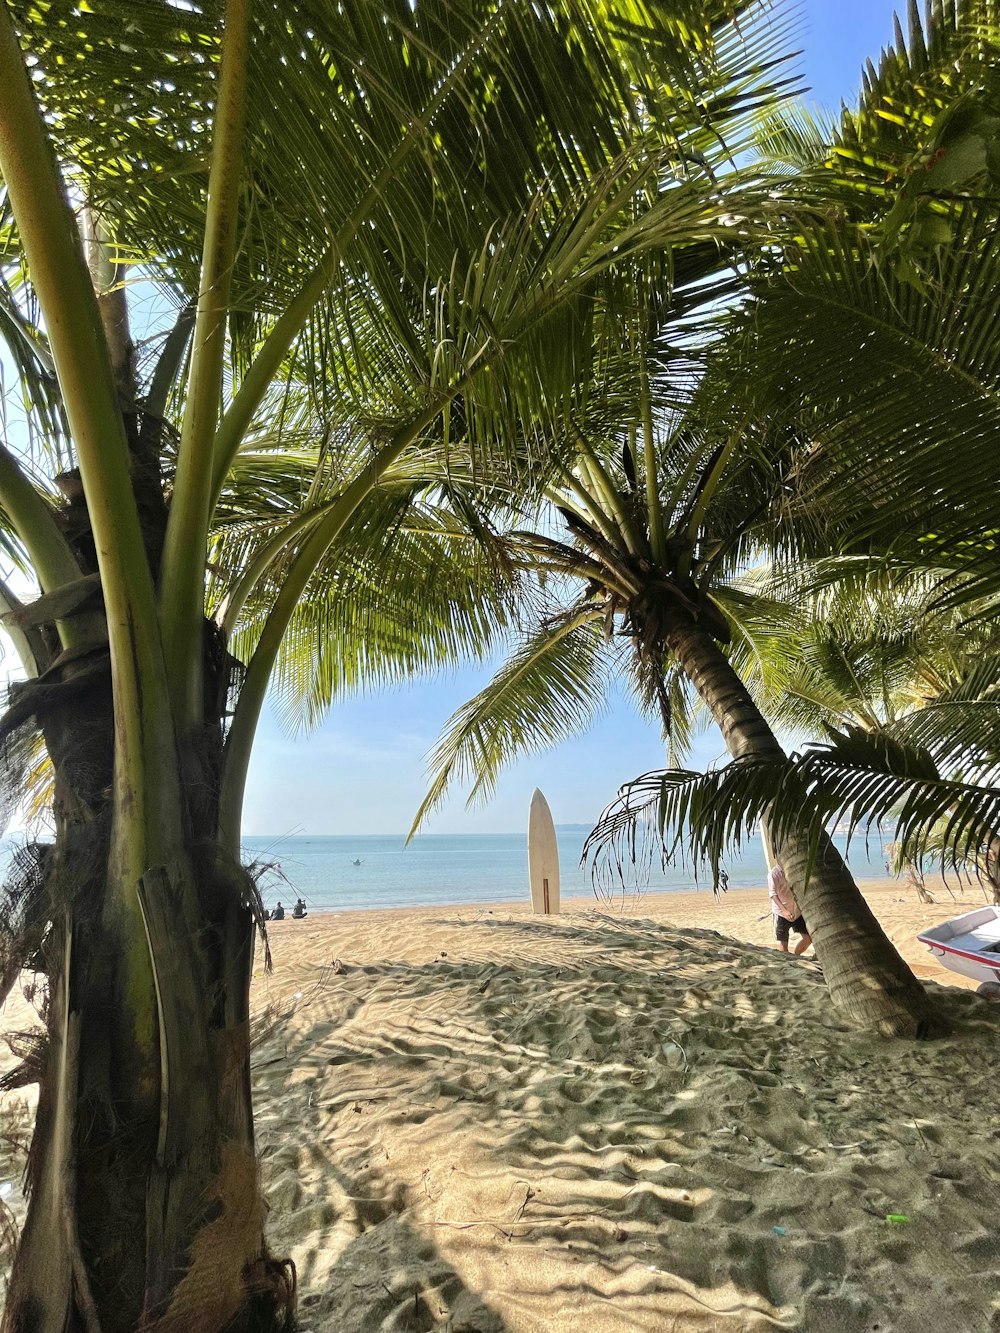 a view of a beach with palm trees and a surfboard